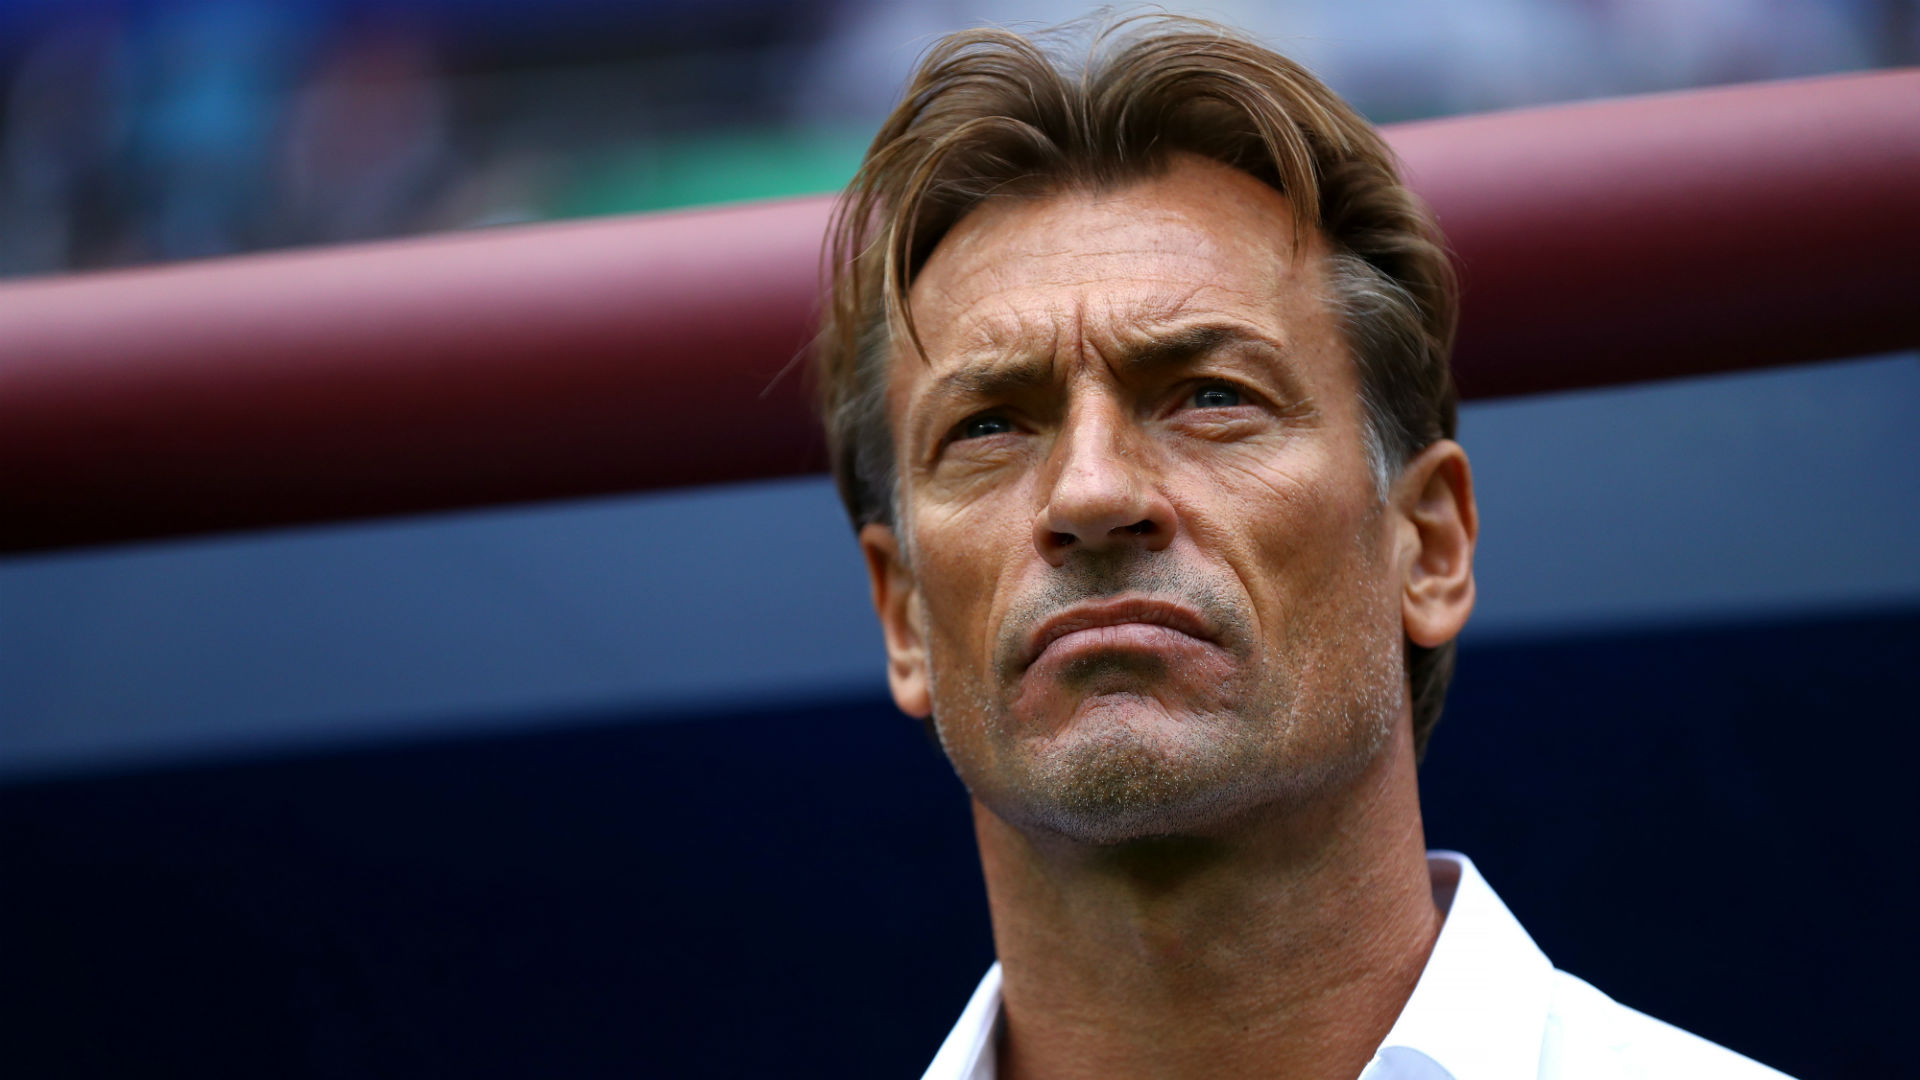 After a disappointing AFCON campaign, which saw them knocked out in the last 16, Herve Renard has stepped down as Morocco coach.